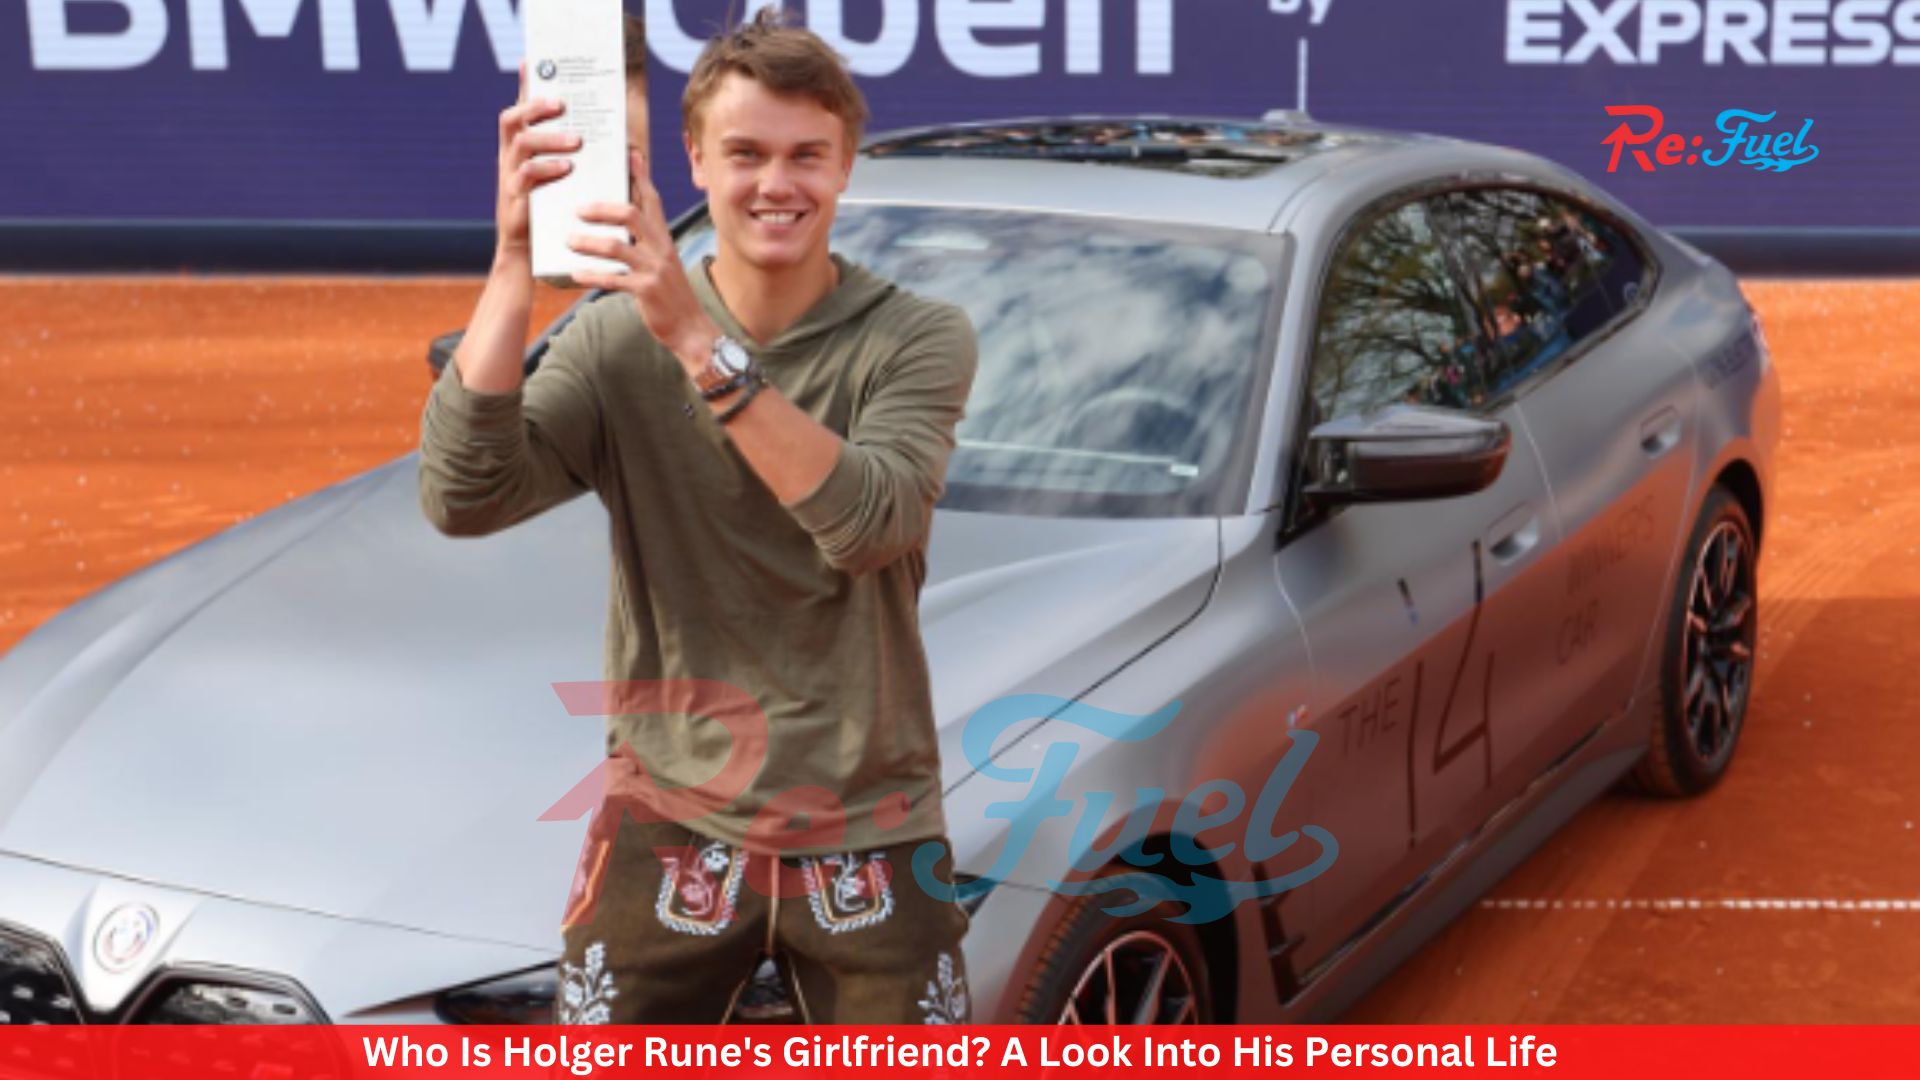 Who Is Holger Rune's Girlfriend? A Look Into His Personal Life